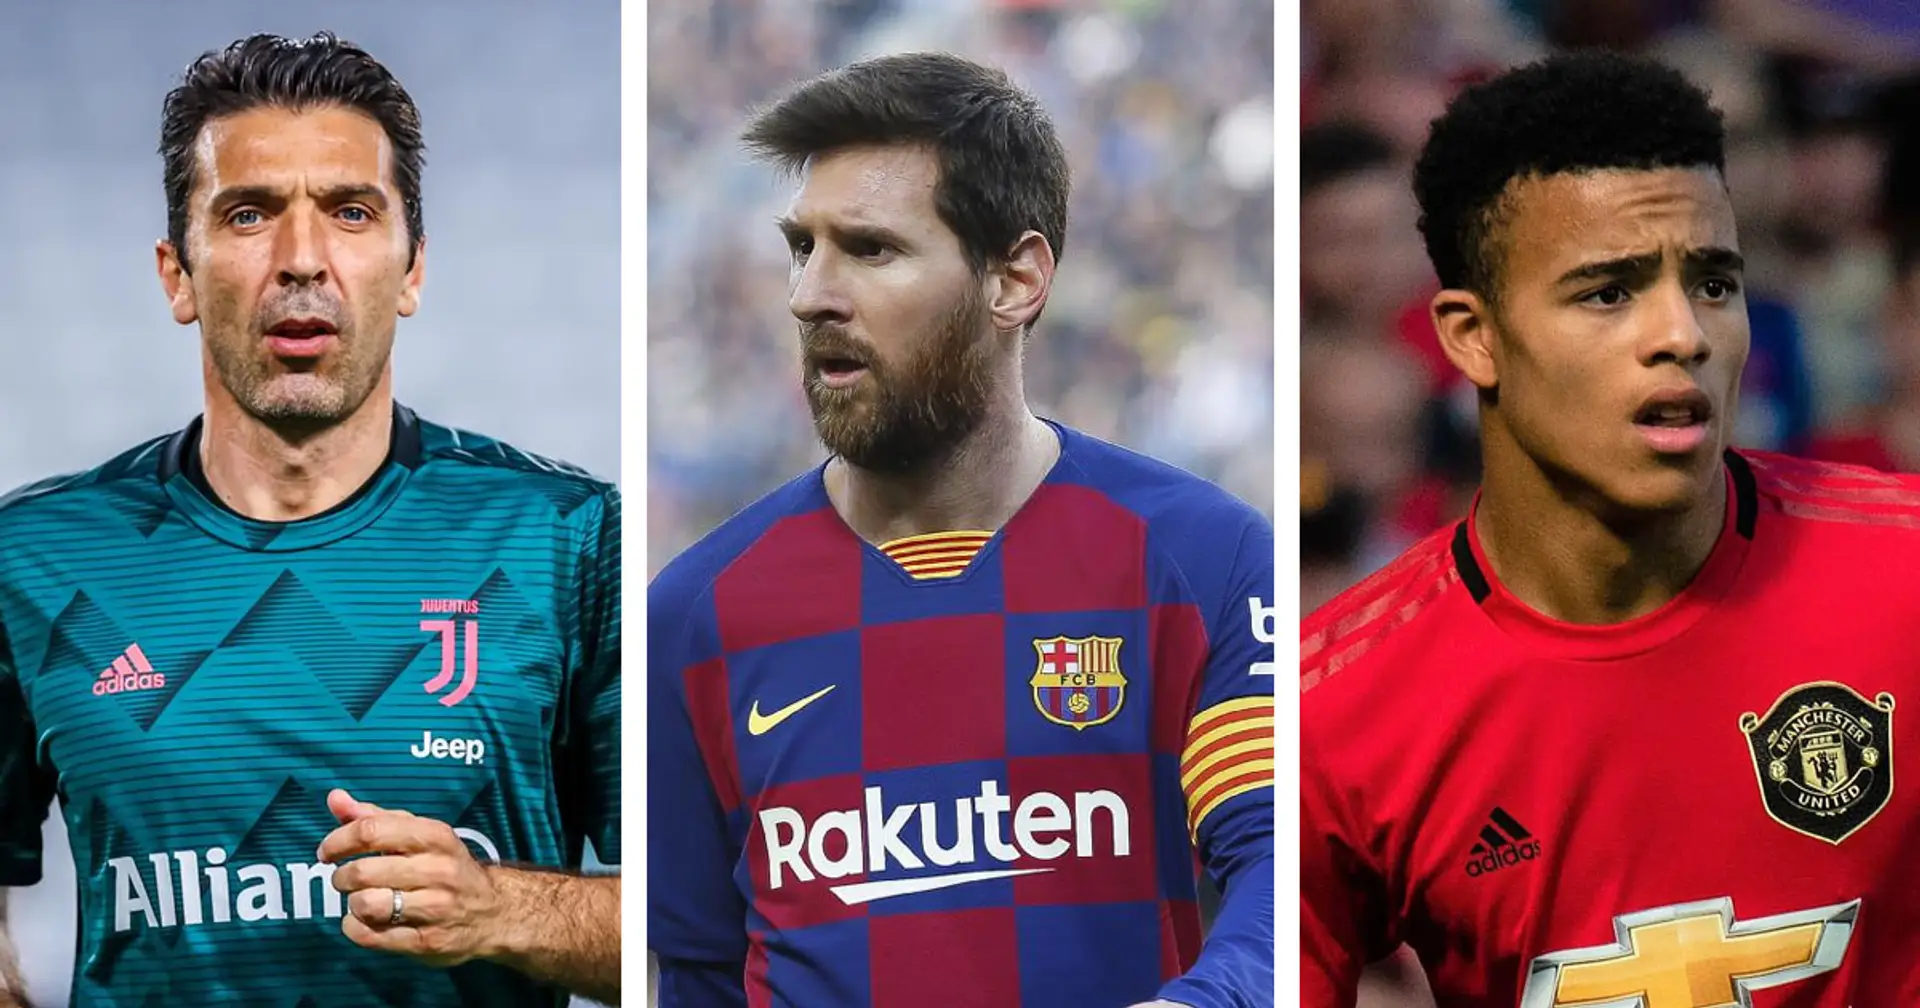 Why you should pay special attention to Leo Messi and 5 other stars in 2020-21 season